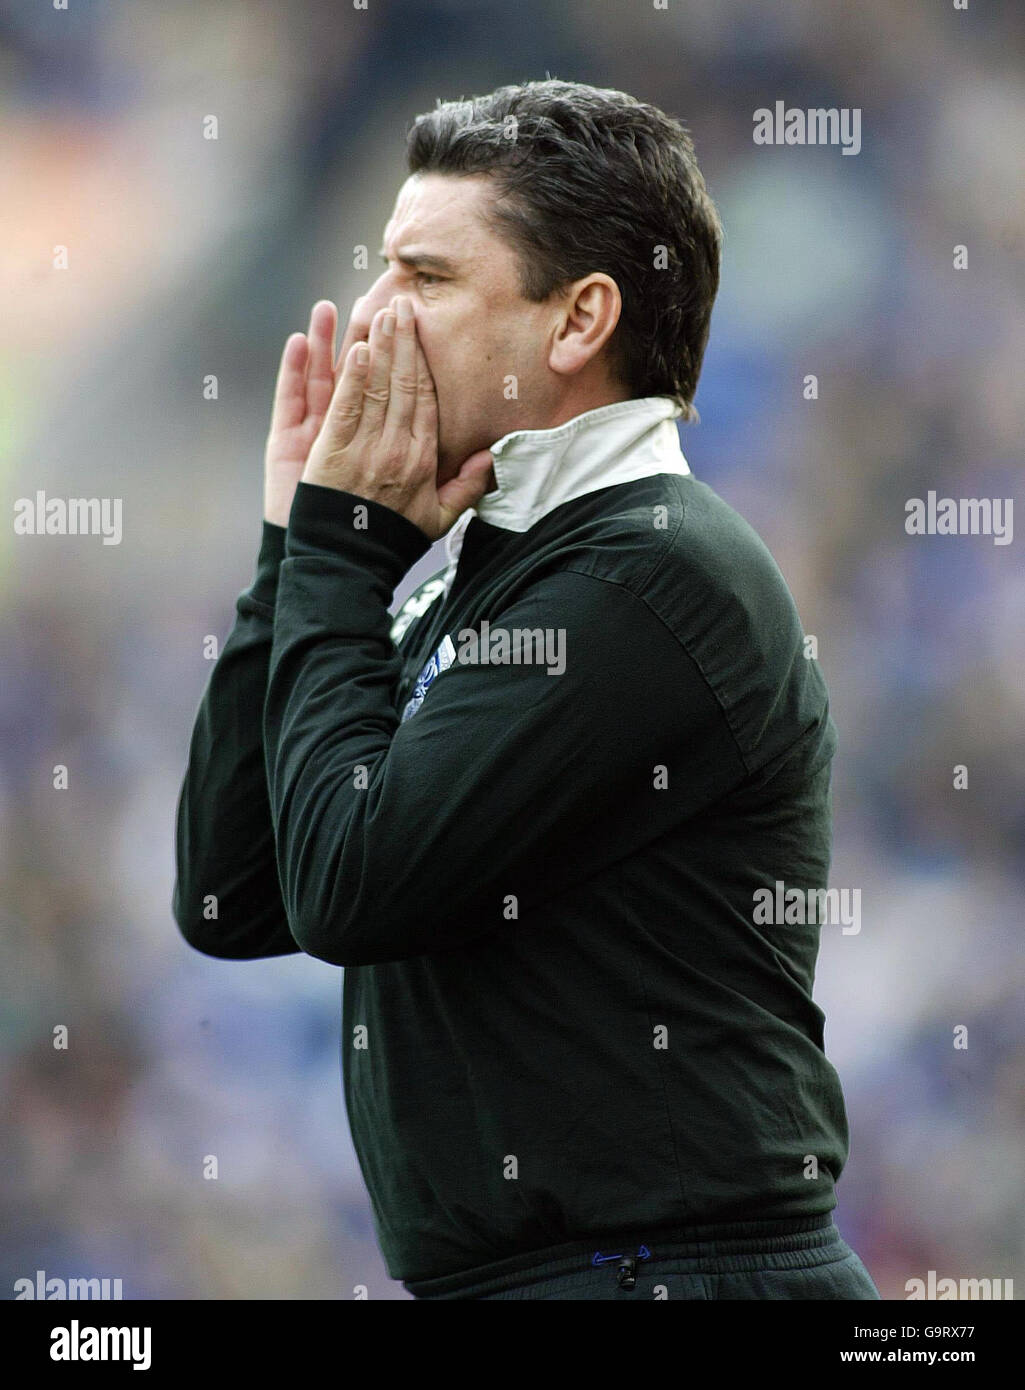 Soccer - Coca-Cola Football League Championship - Leicester City v Queens Park Rangers - The Walkers Stadium. QPR manager John Gregory shouts to his players during the Coca-Cola Football League Championship match at the Walkers Stadium, Leicester. Stock Photo